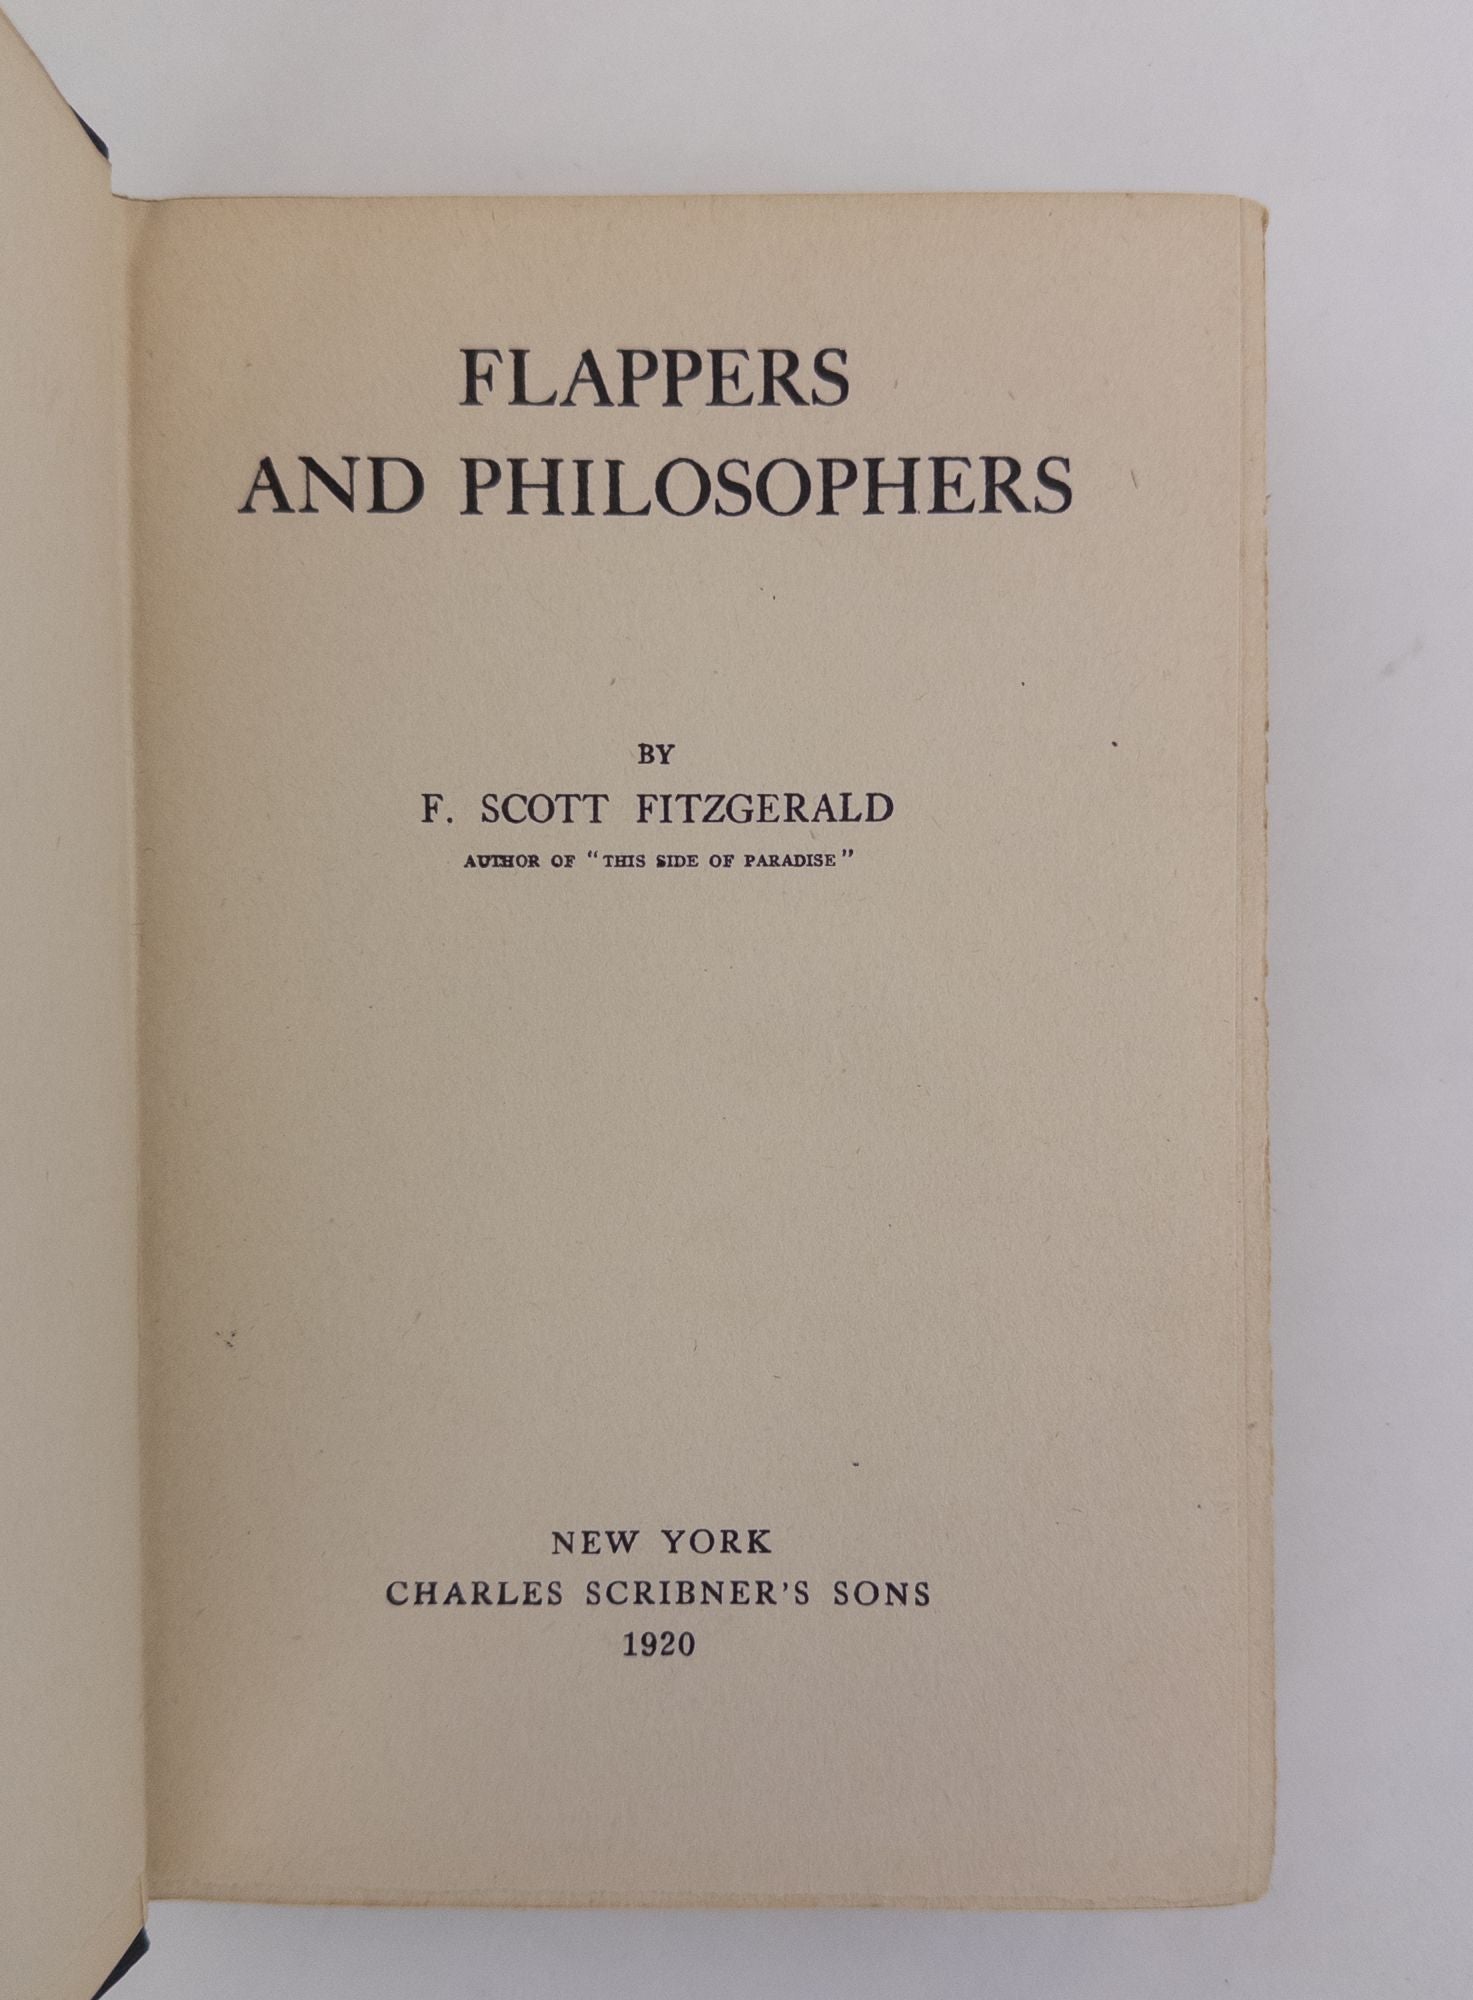 Product Image for FLAPPERS AND PHILOSOPHERS